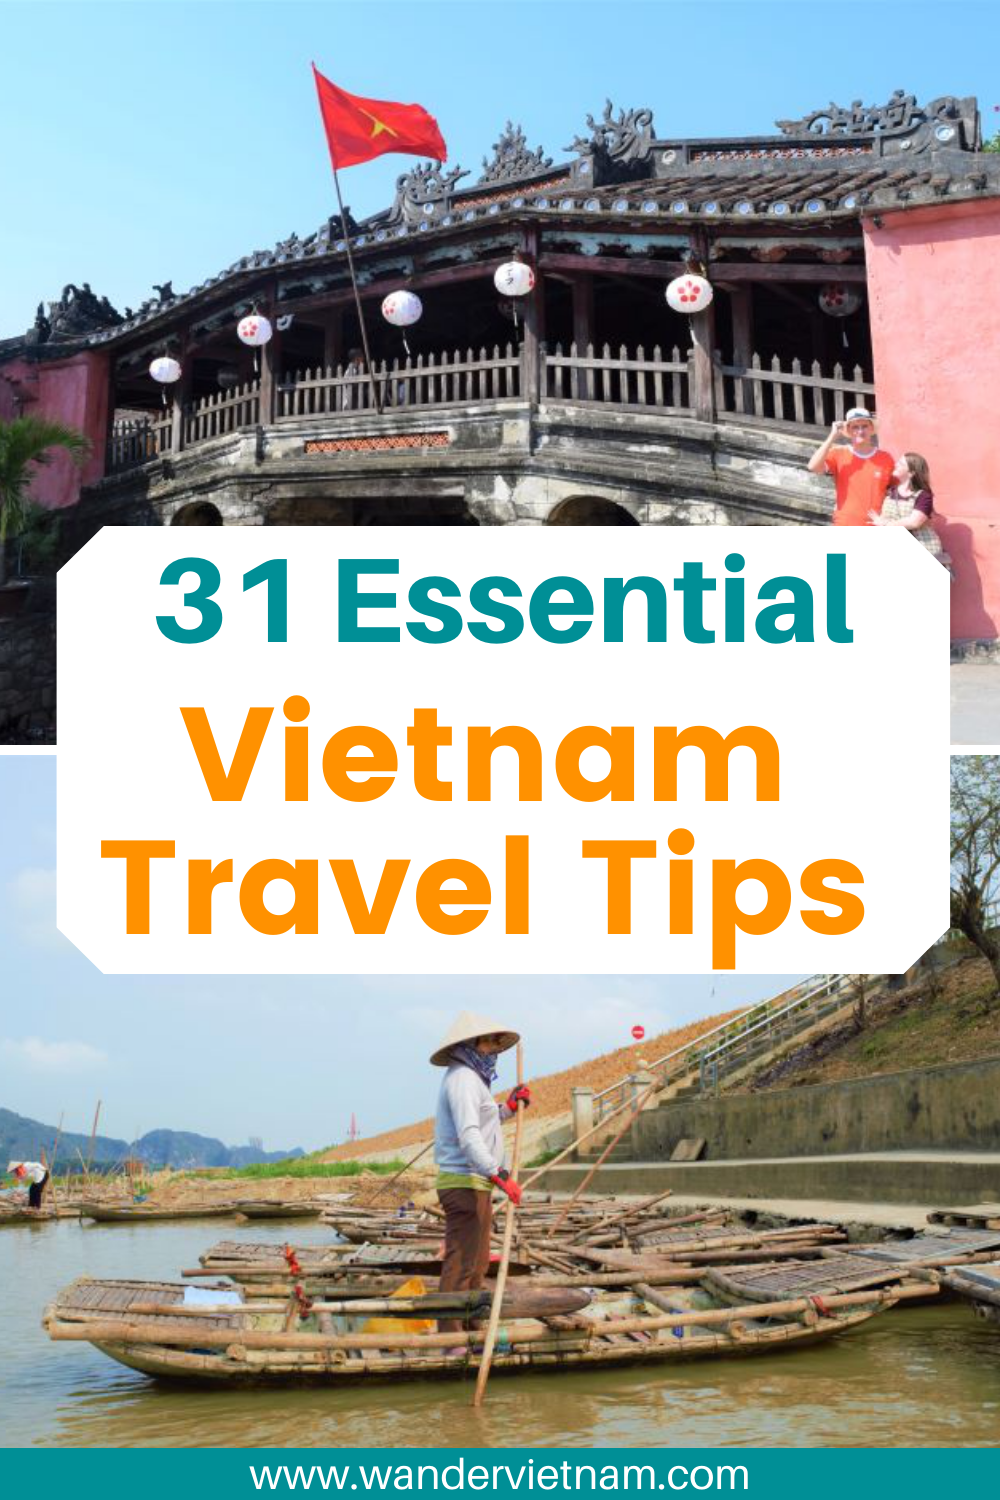 Essential Travel Tips to Vietnam That You Need Know